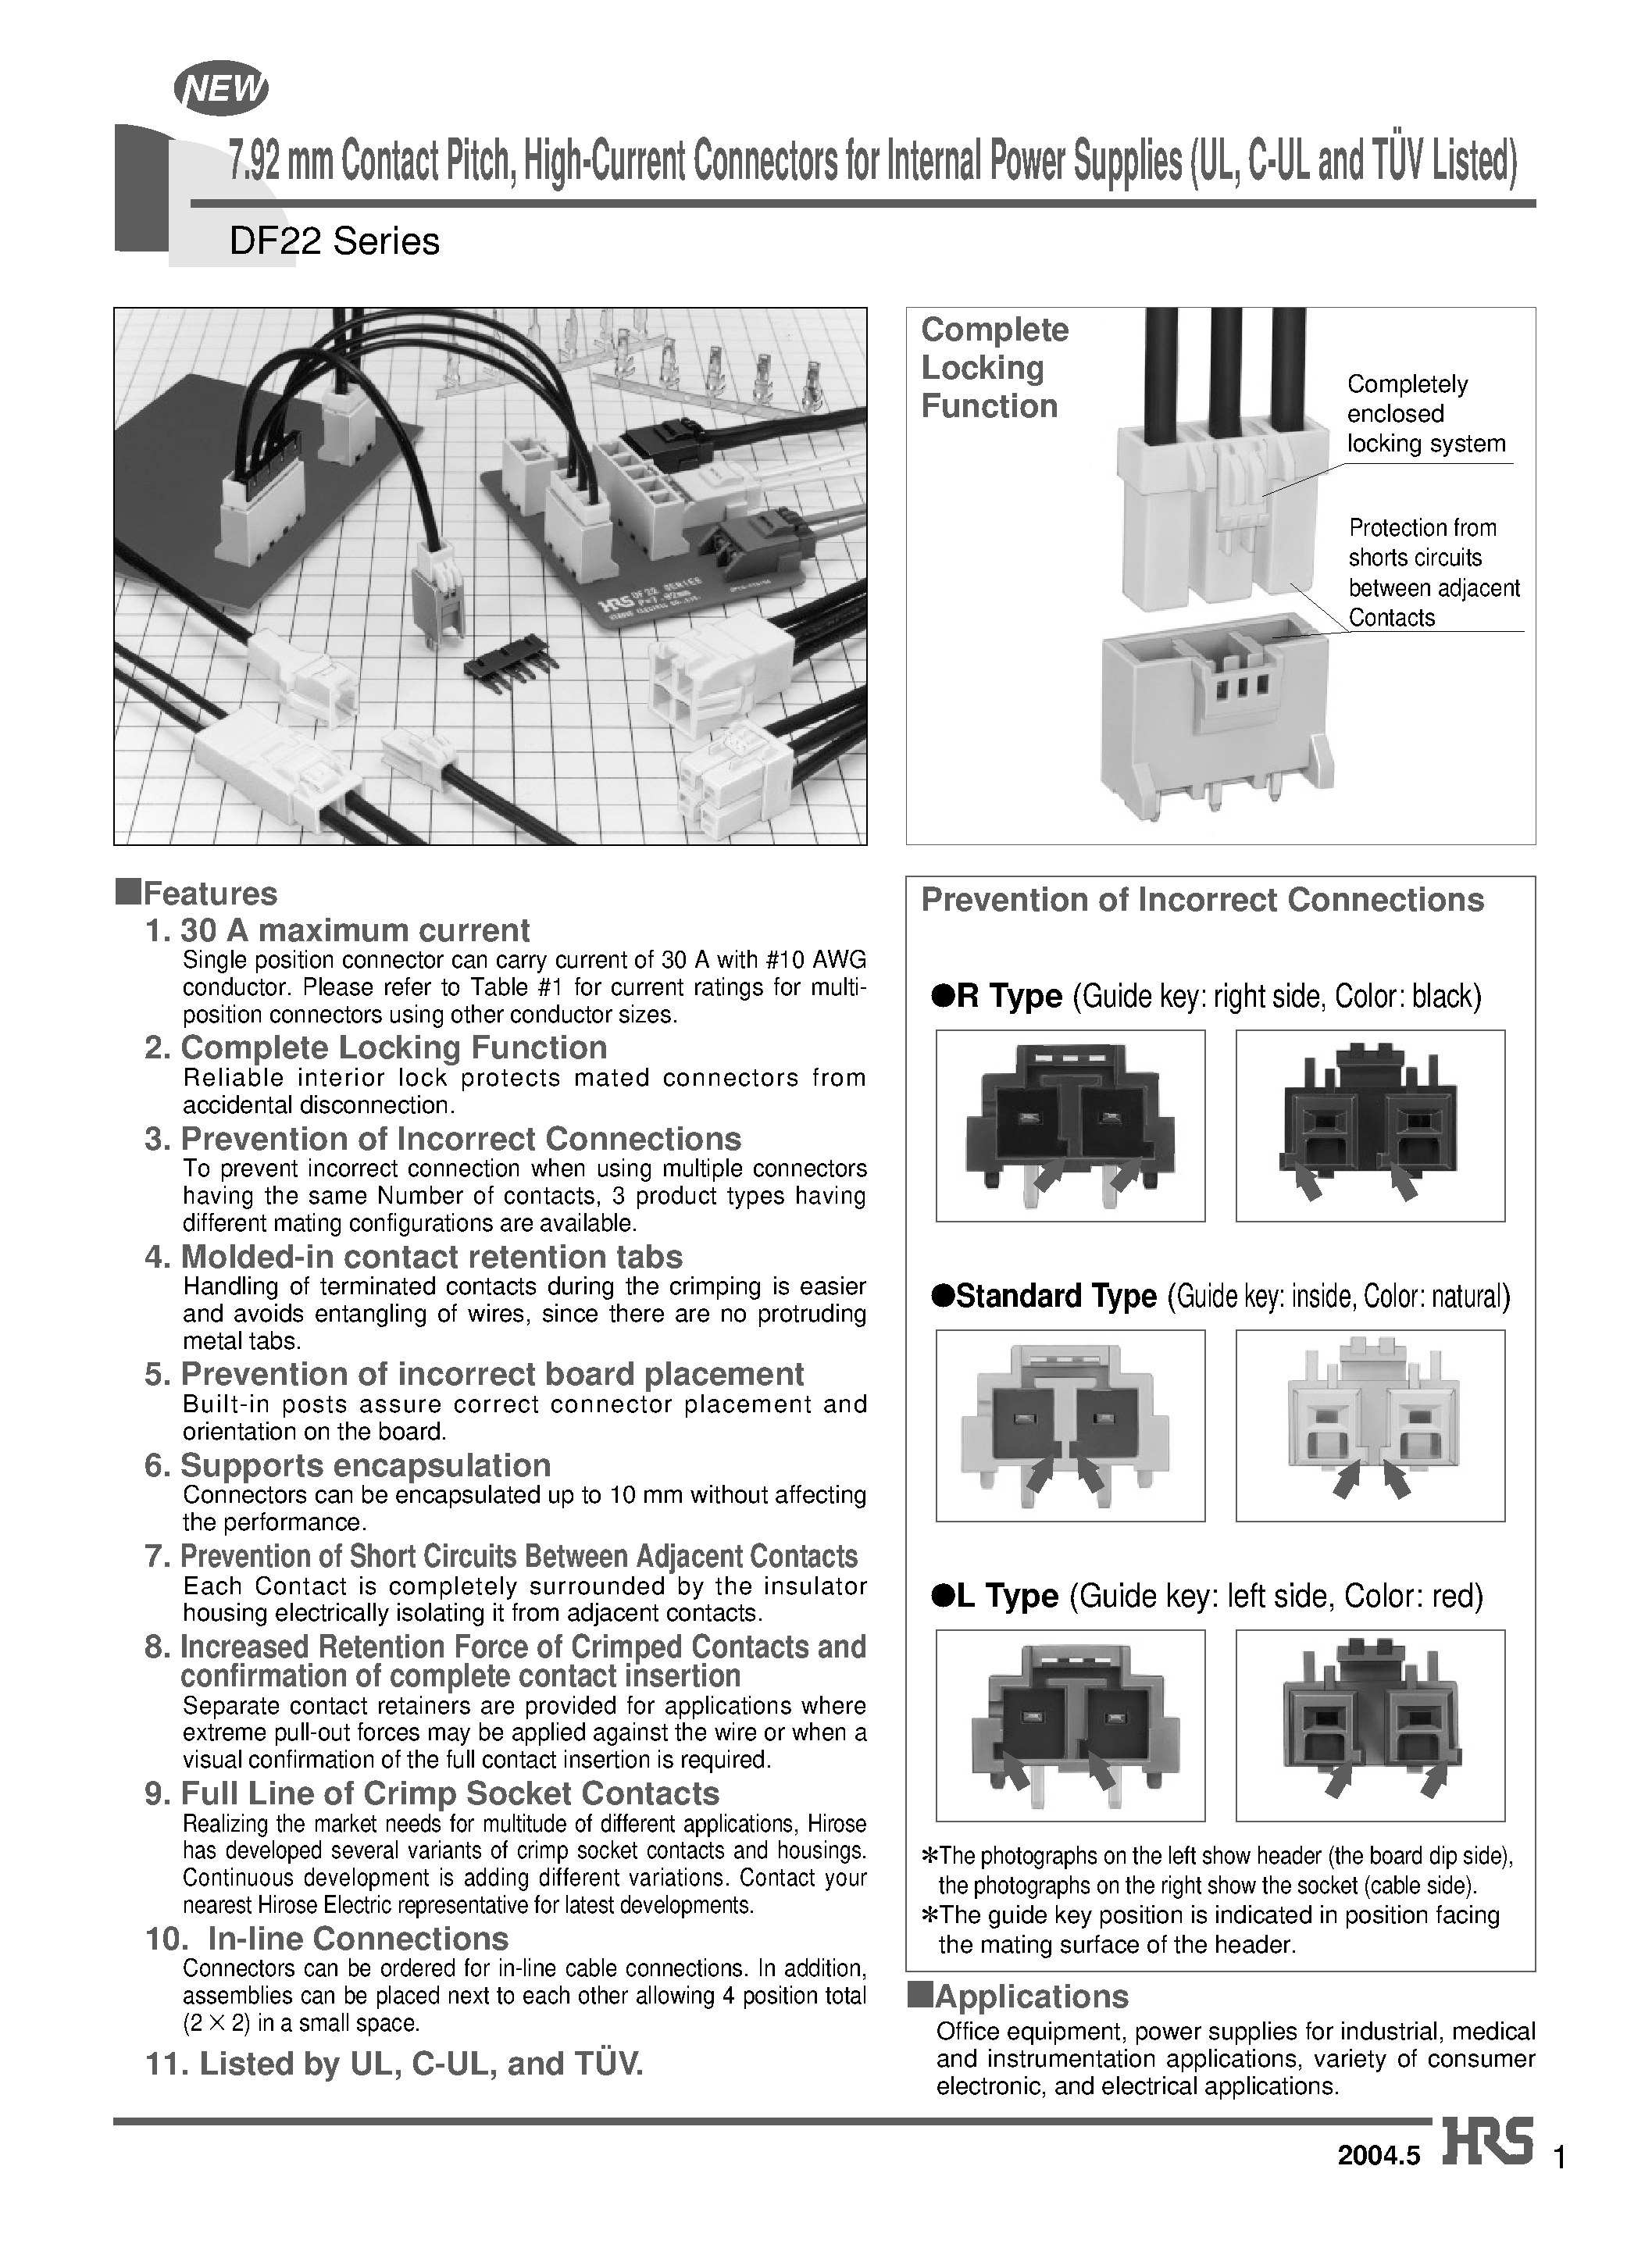 Даташит DF22AL-1S-7.92DSA - 7.92 mm Contact Pitch/ High-Current Connectors for Internal Power Supplies (UL/ C-UL and TUV Listed) страница 1